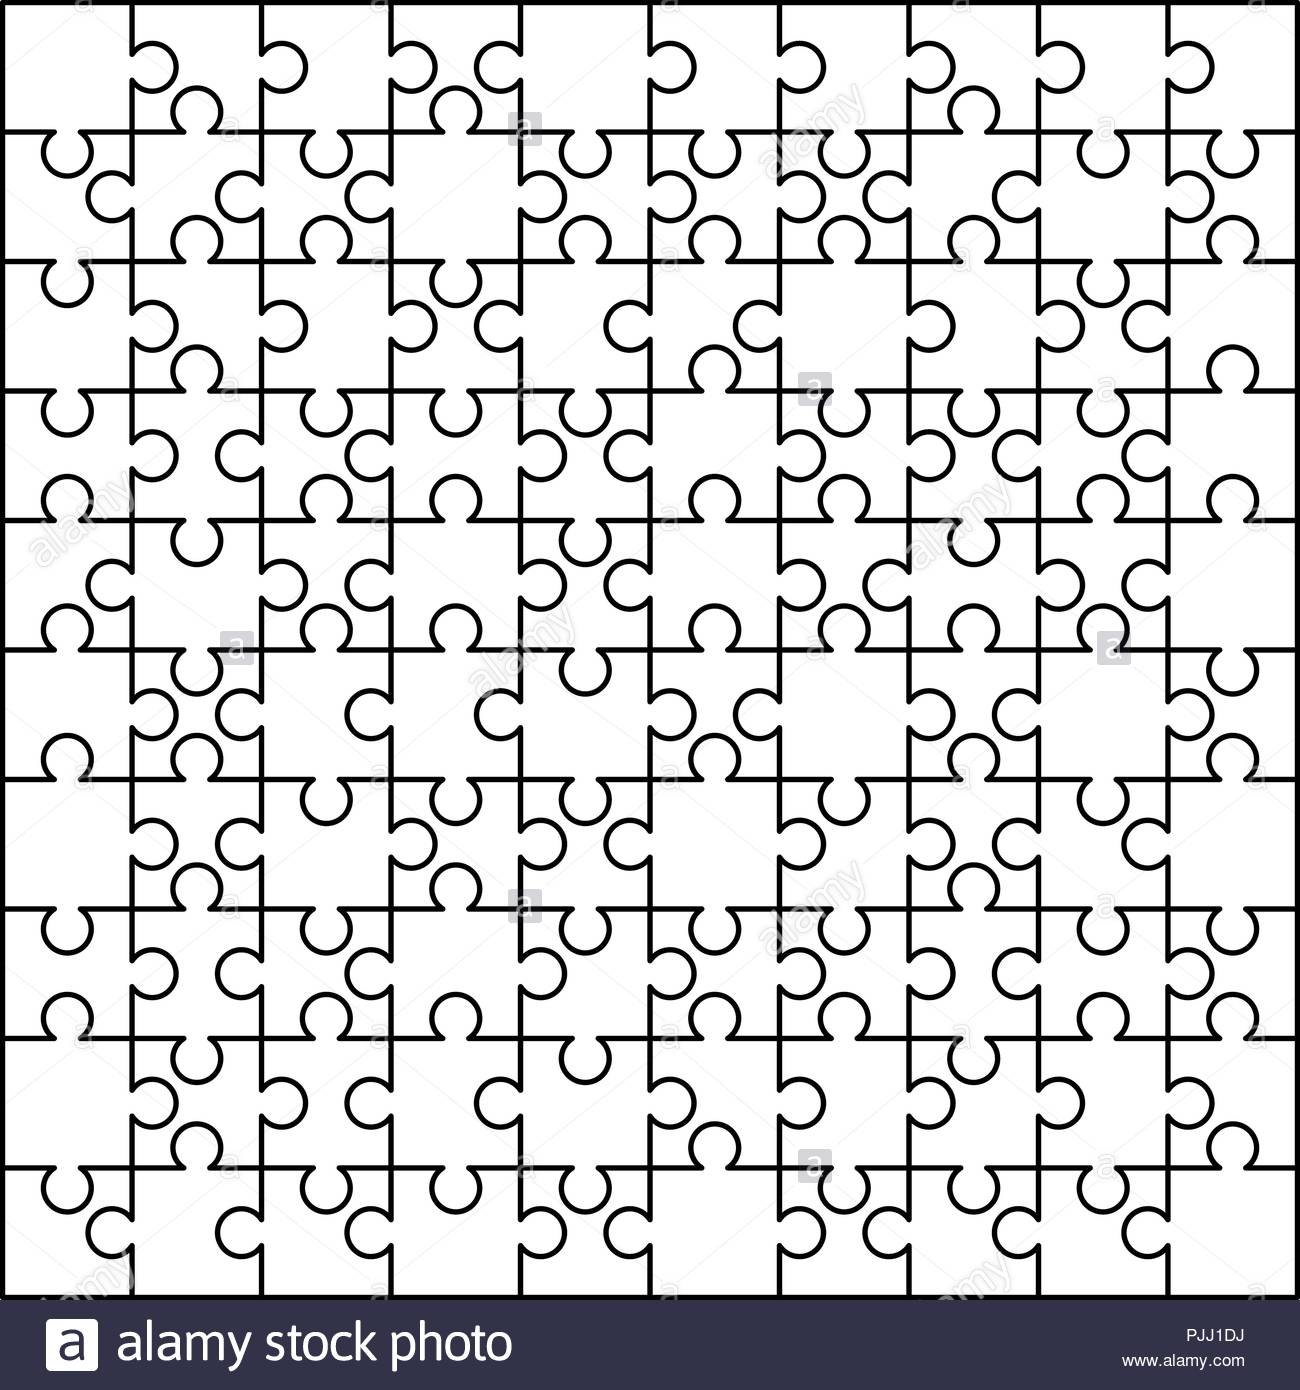 120 White Puzzles Pieces Arranged In A Rectangle Shape. Jigsaw - Print Puzzle From Photo